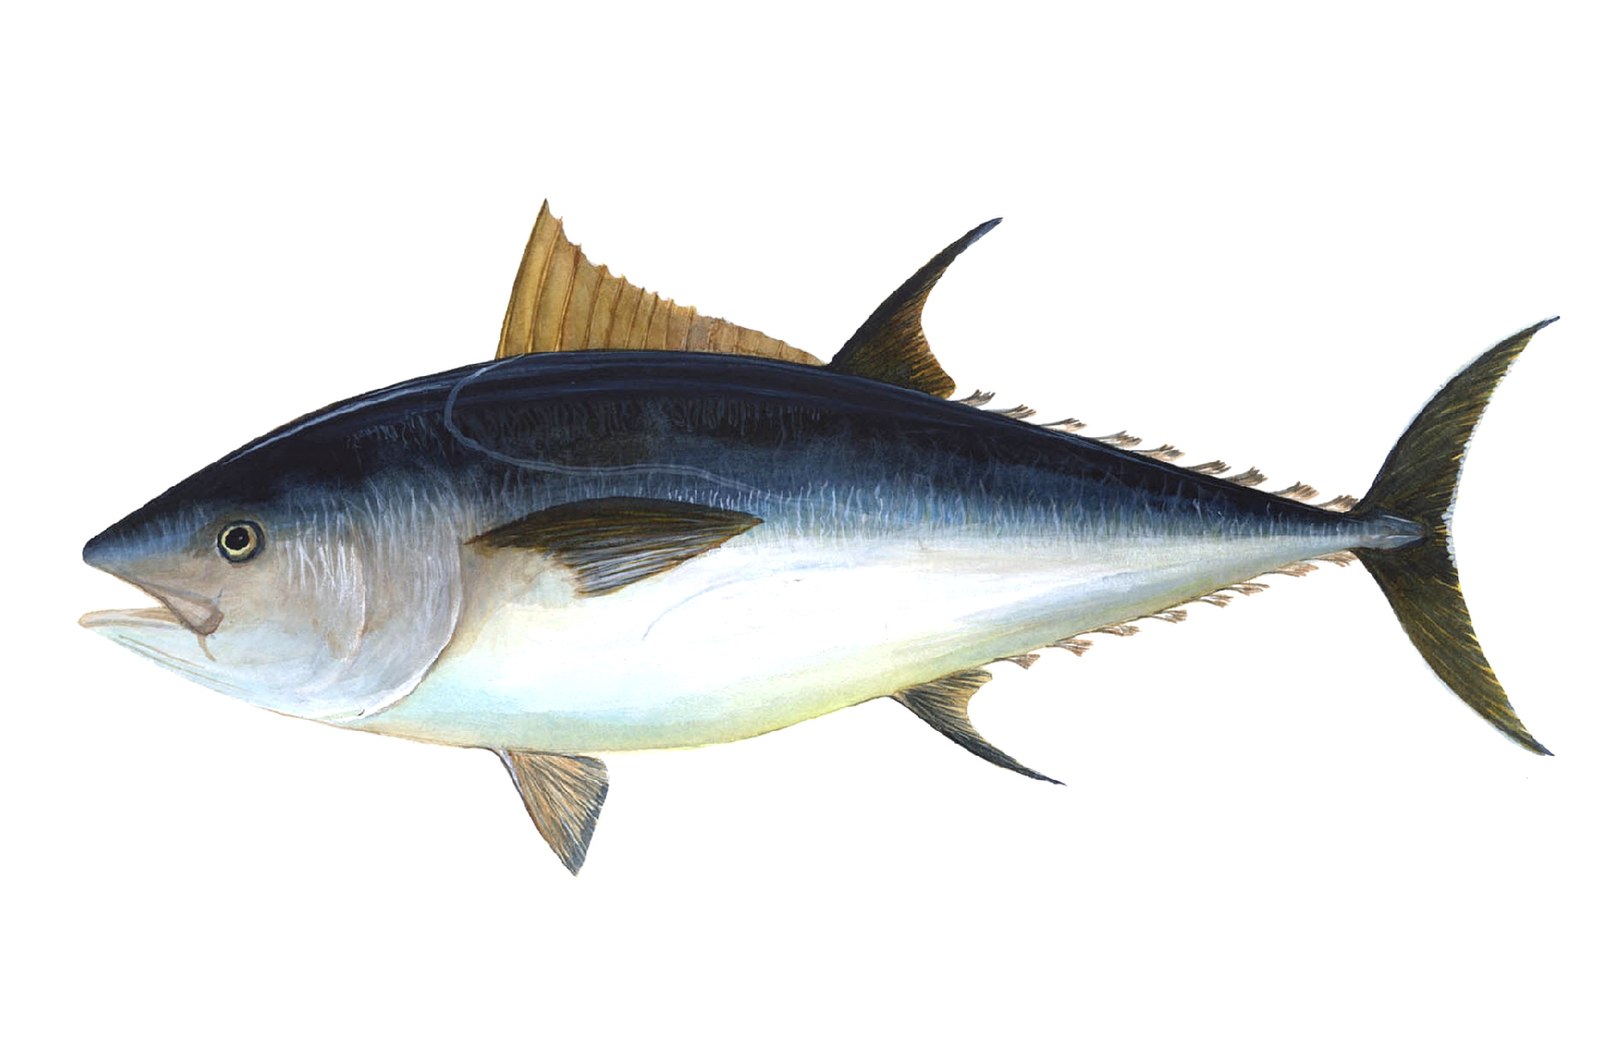 Illustration of atlantic bluefin tuna. Dark blue on top, light blue on belly. Fins are a mustard color.